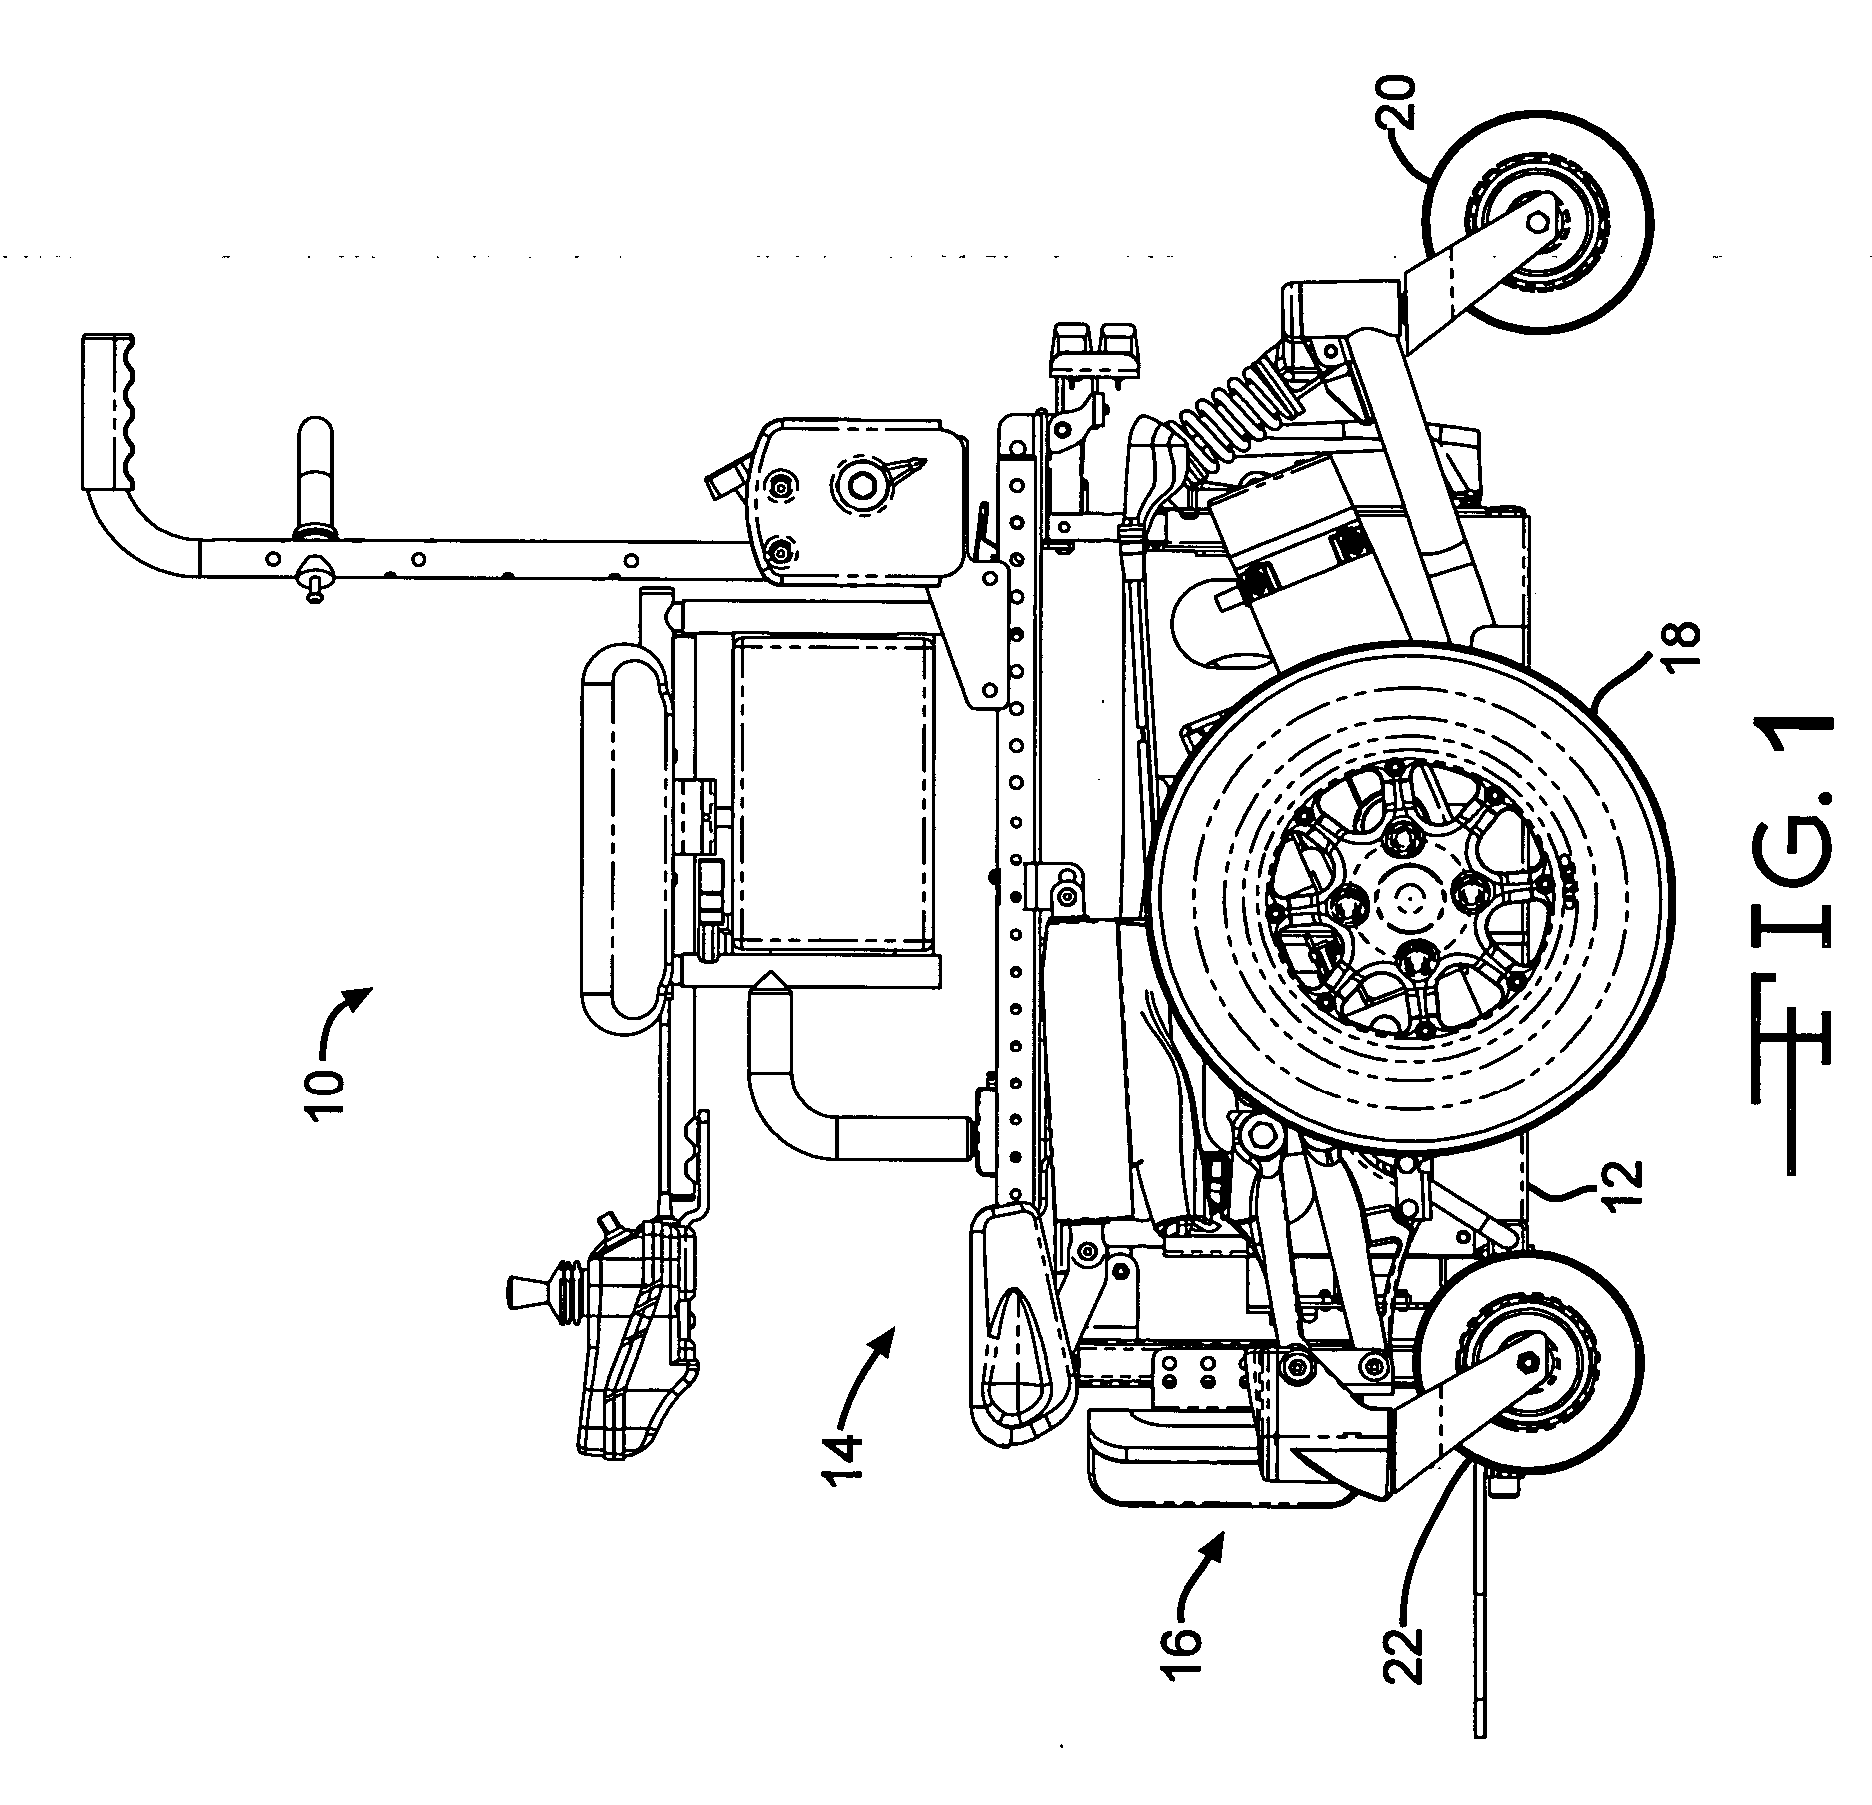 Wheelchair with damping mechanism